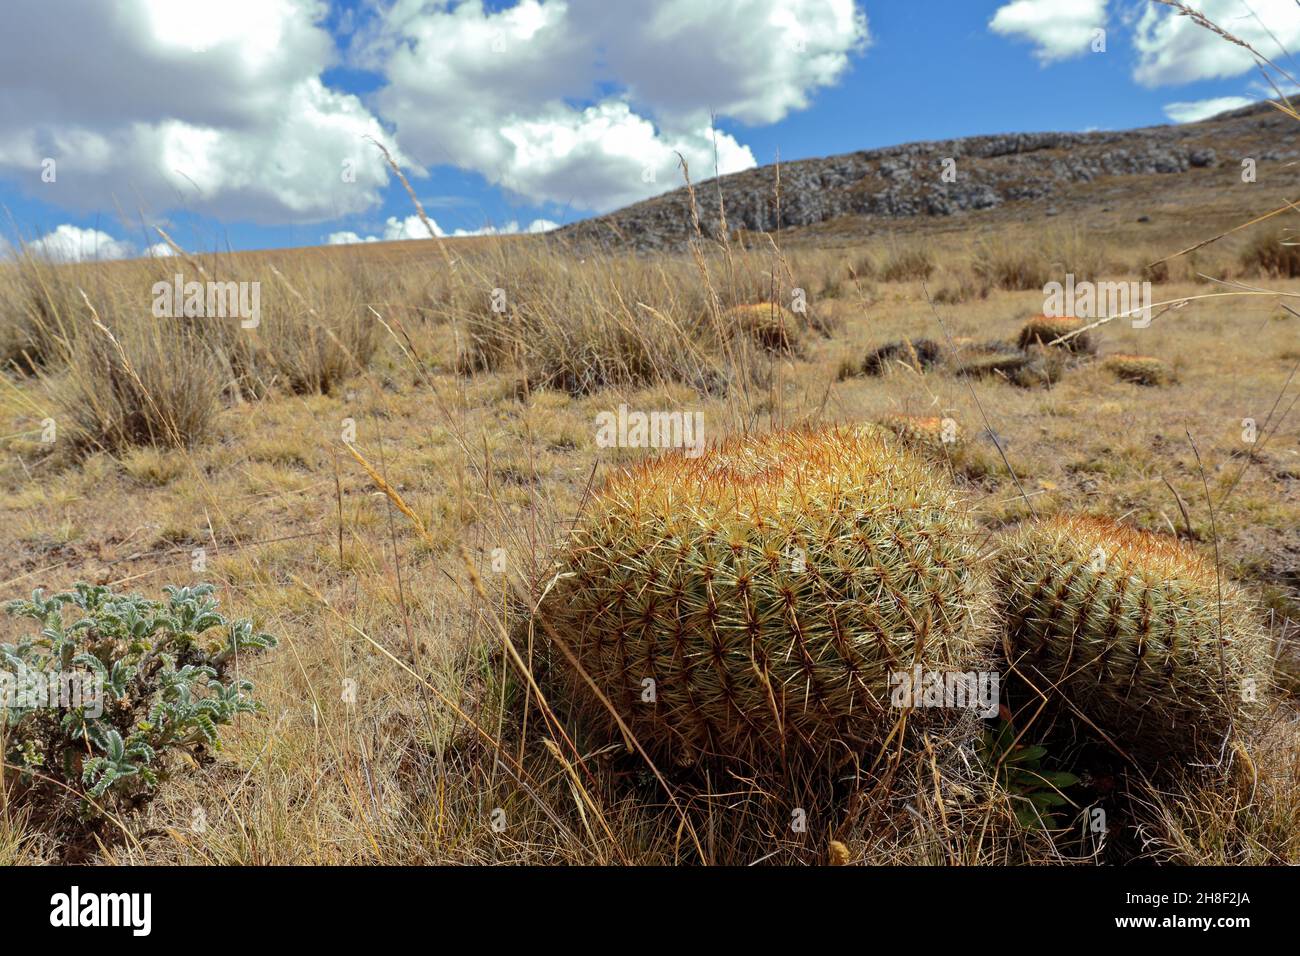 Beautiful wild specimen of a cactus whose scientific name is Oroya peruviana, an endemic plant of Peru that is in danger of extinction and with a decr Stock Photo